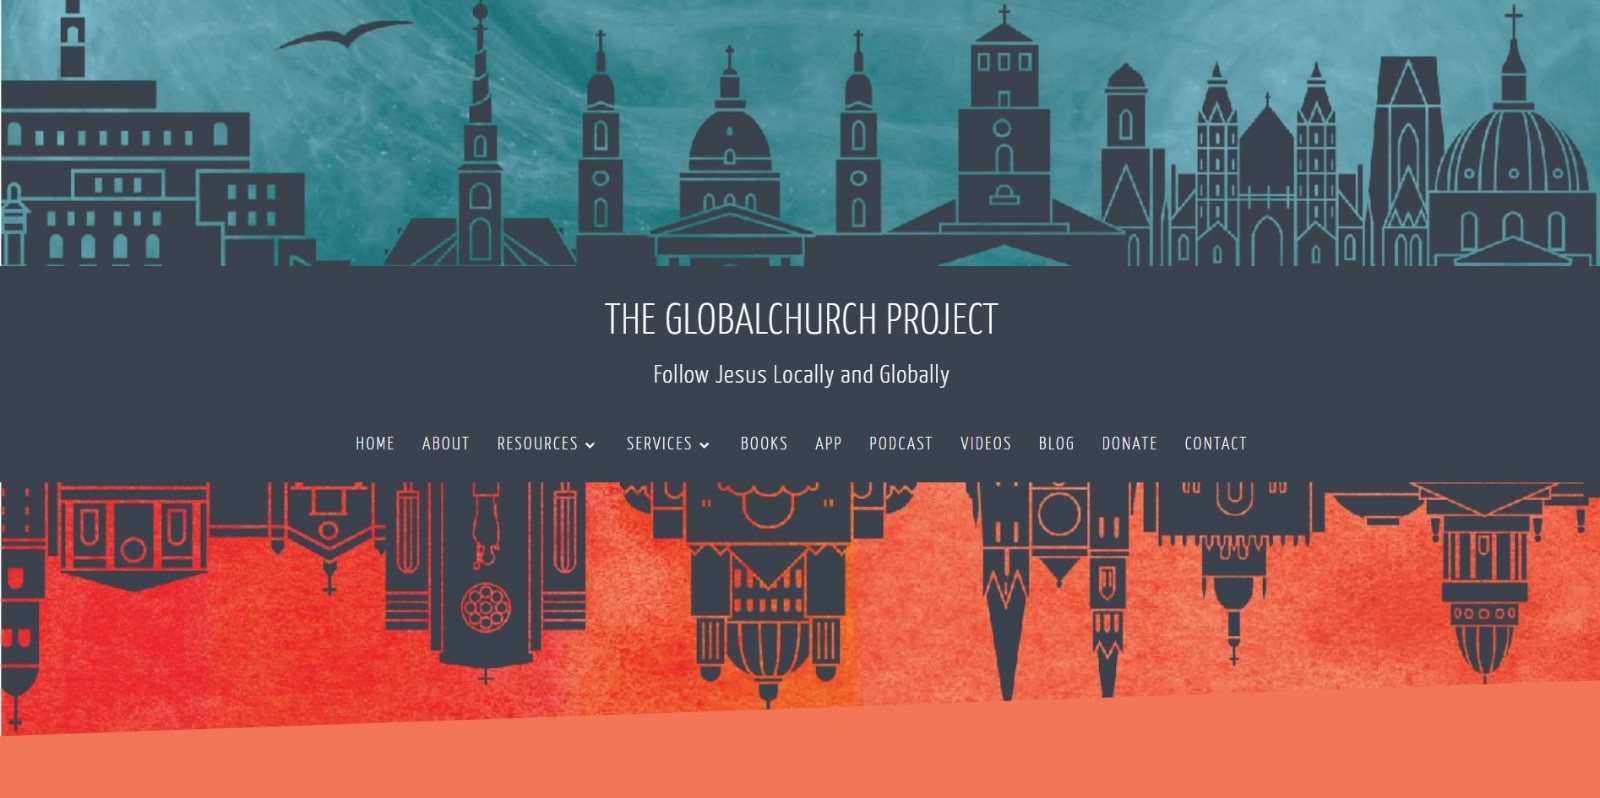 The Globalchurch Project